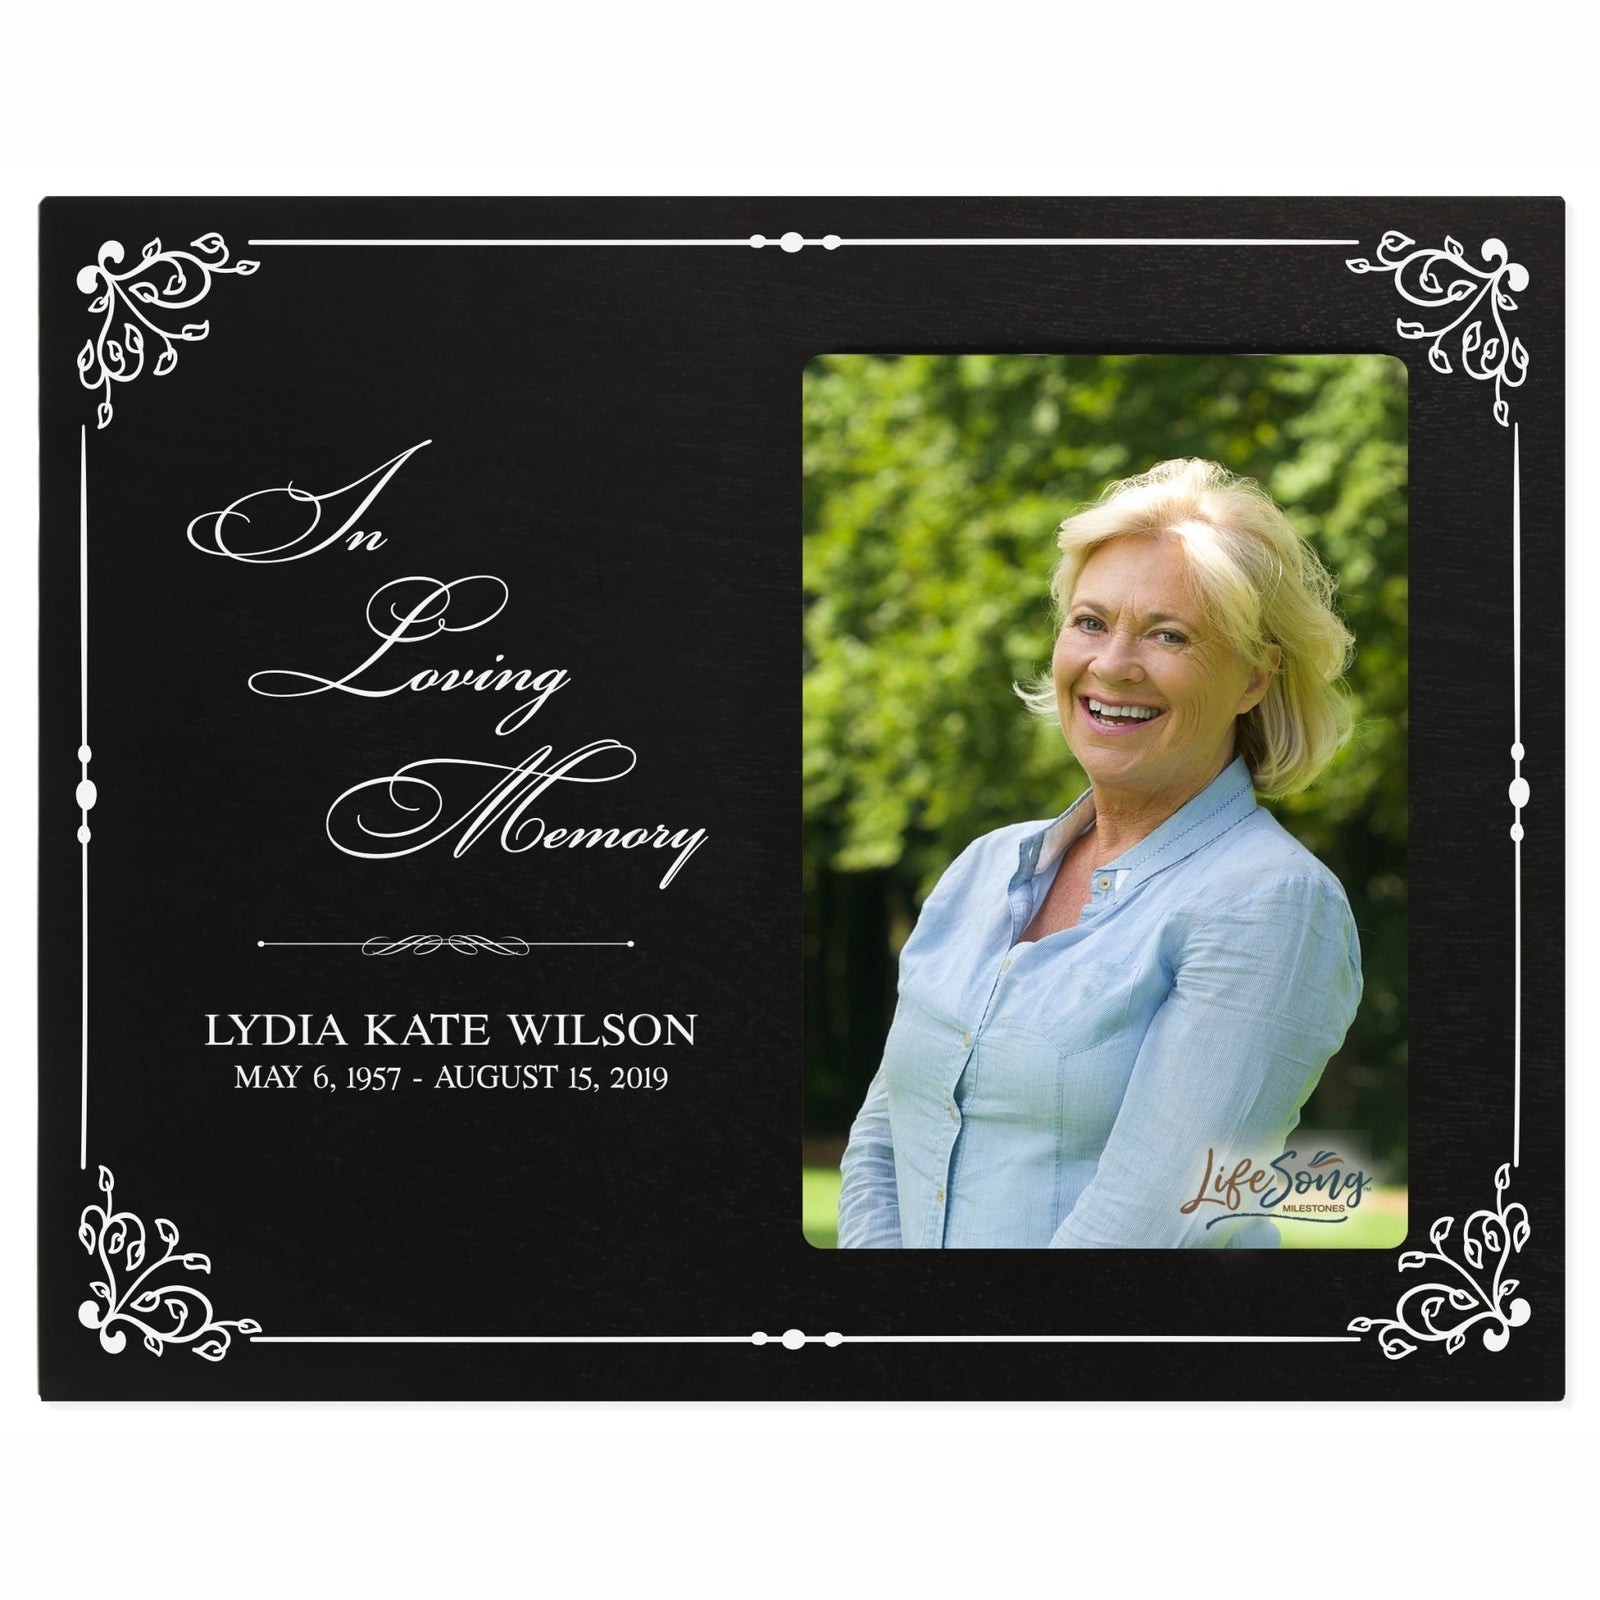 Personalized Wooden Memorial 8x10 Picture Frame holds 4x6 photo In Loving Memory Border - LifeSong Milestones